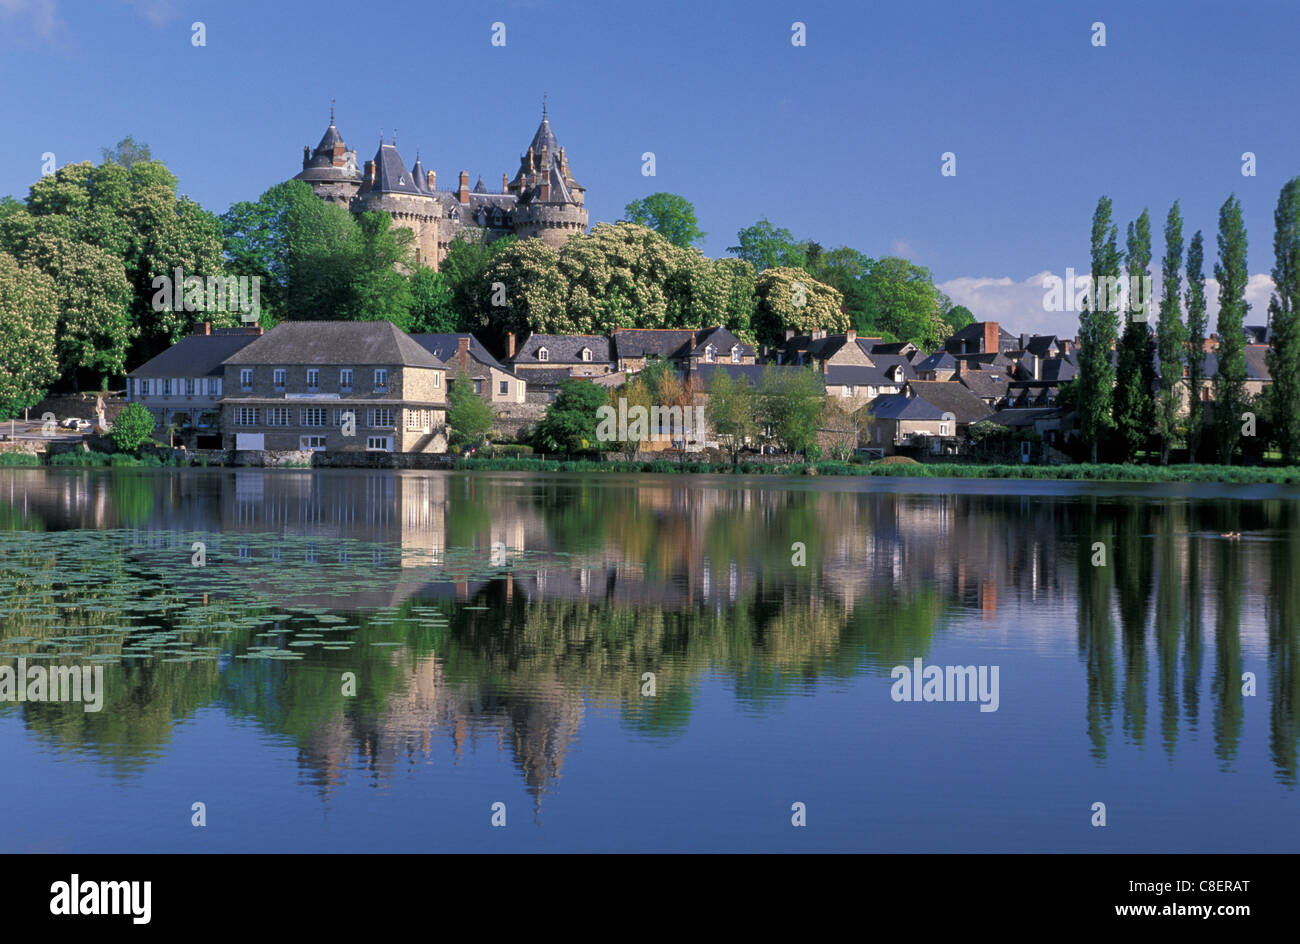 Chateau Combourg, Combourg, Brittany, Bretagne, France, Europe, castle Stock Photo